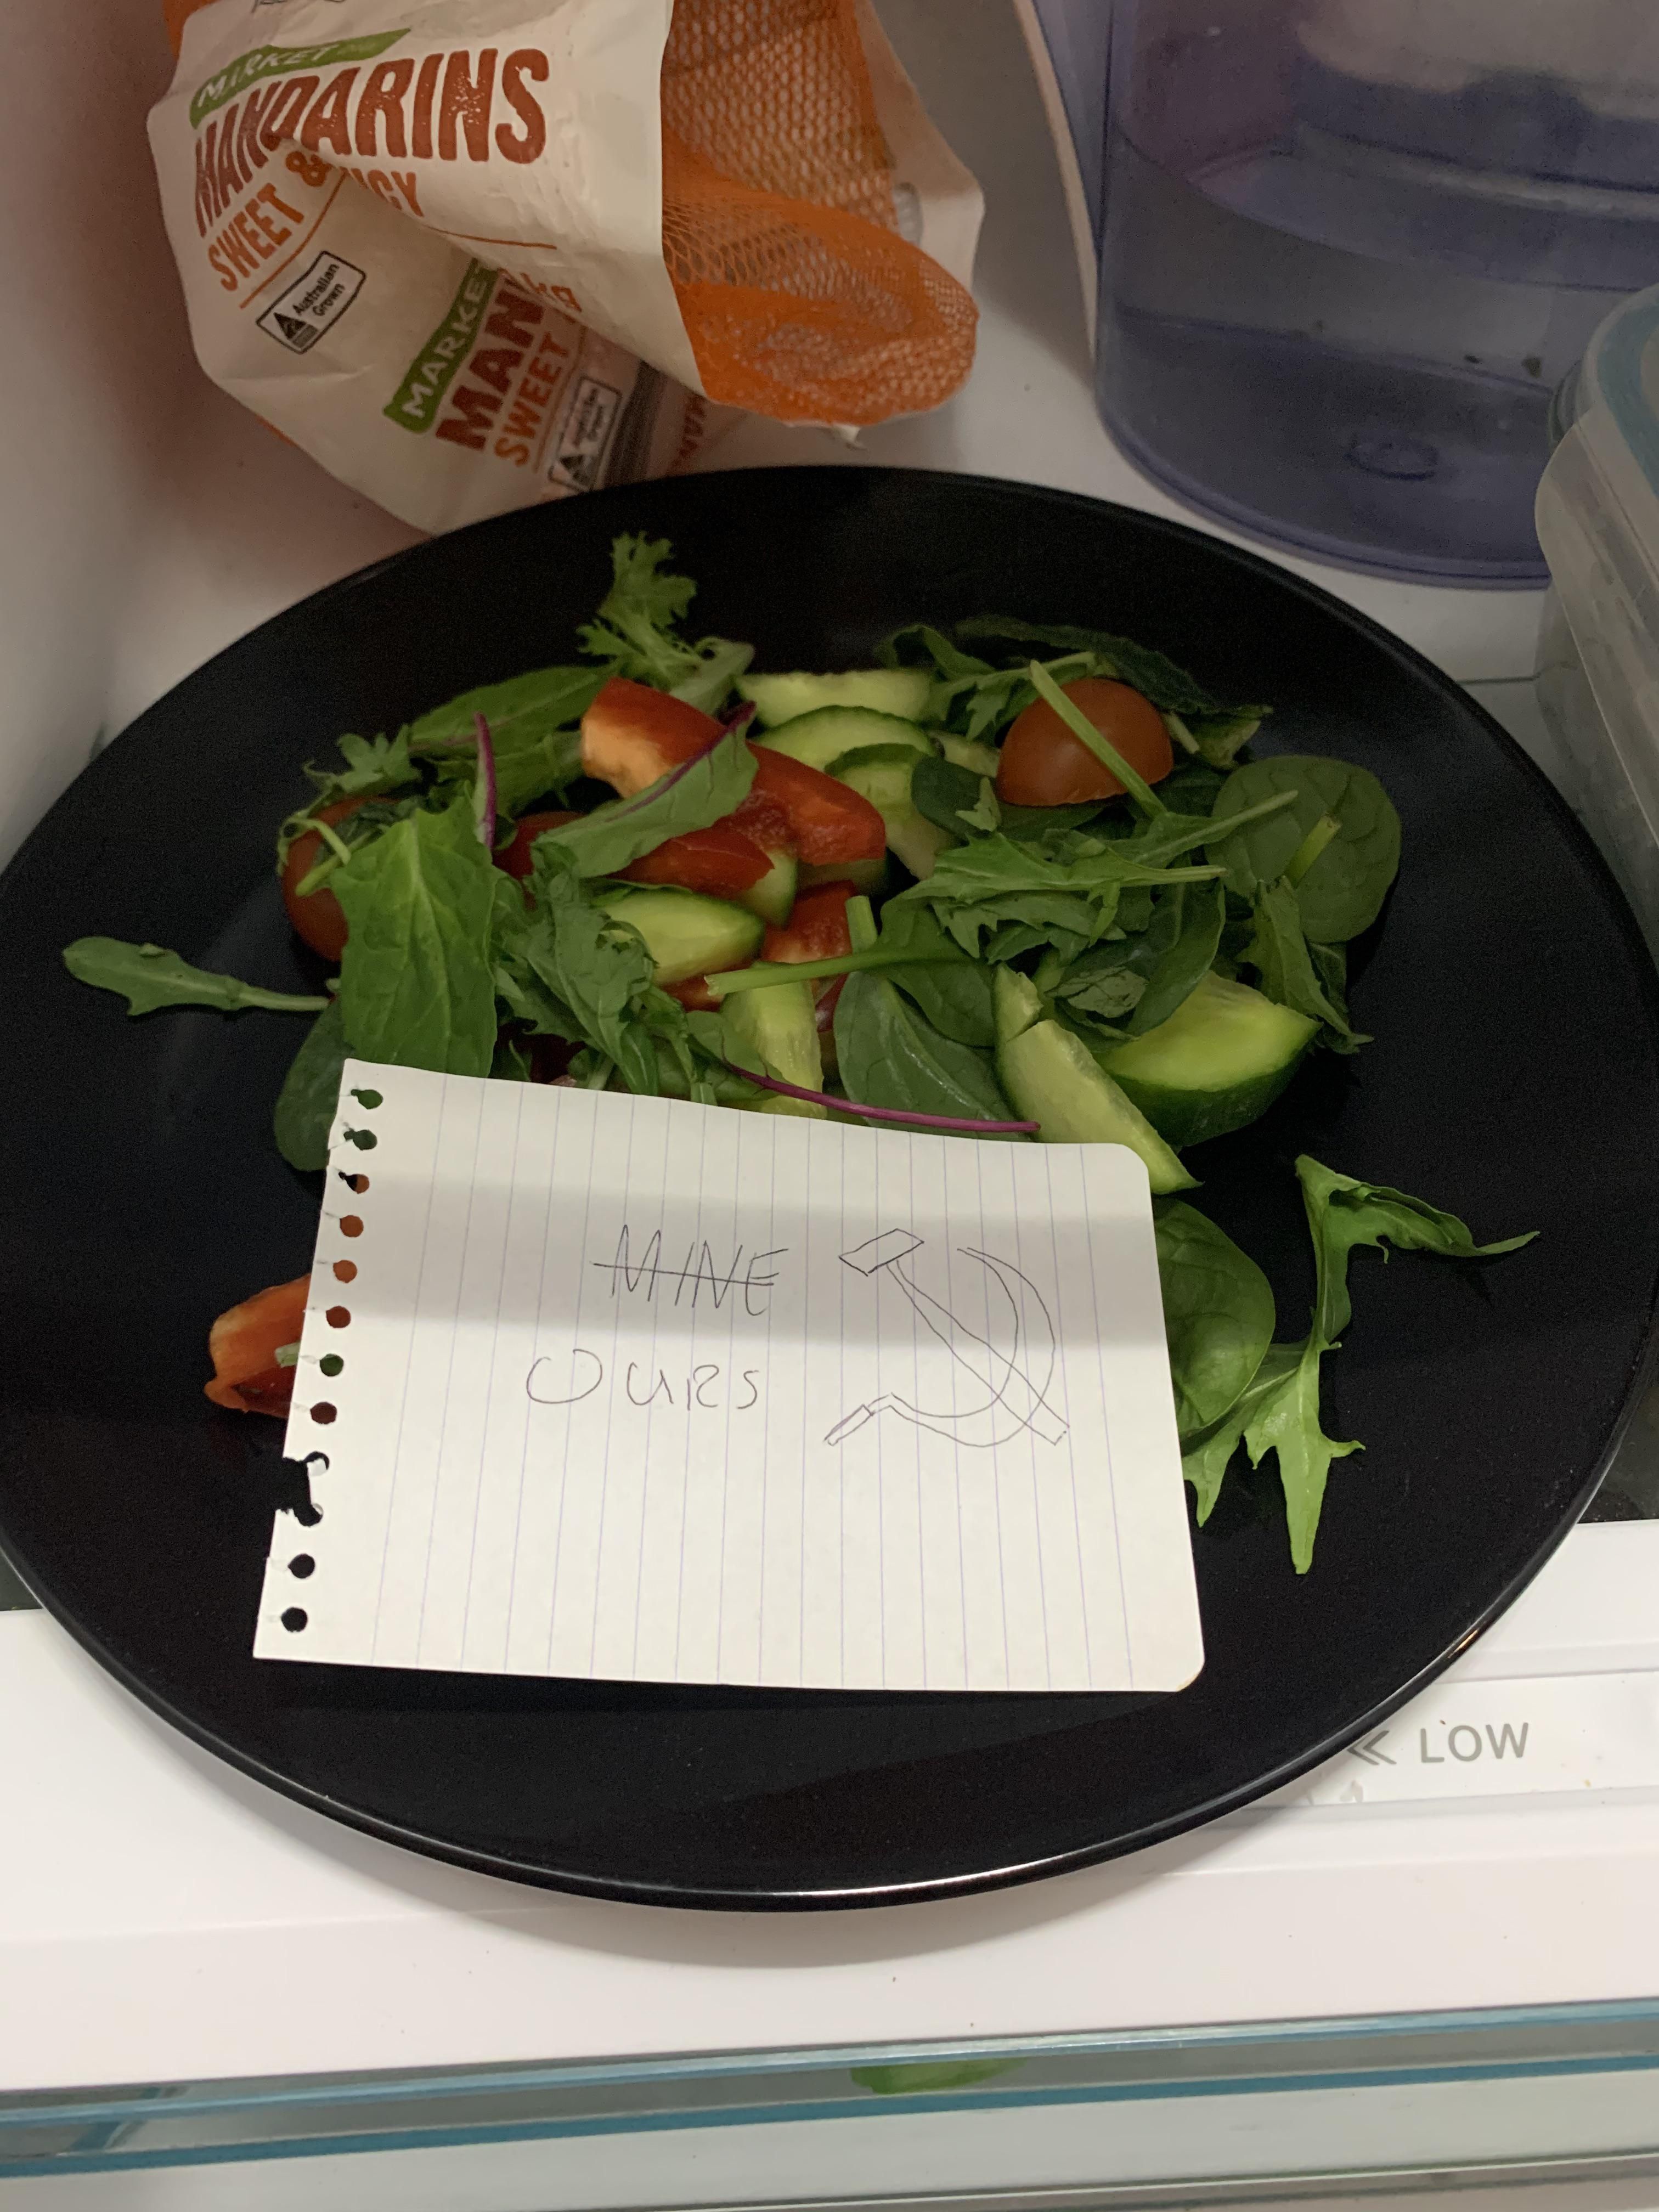 Girlfriend tried to claim a salad in the fridge.